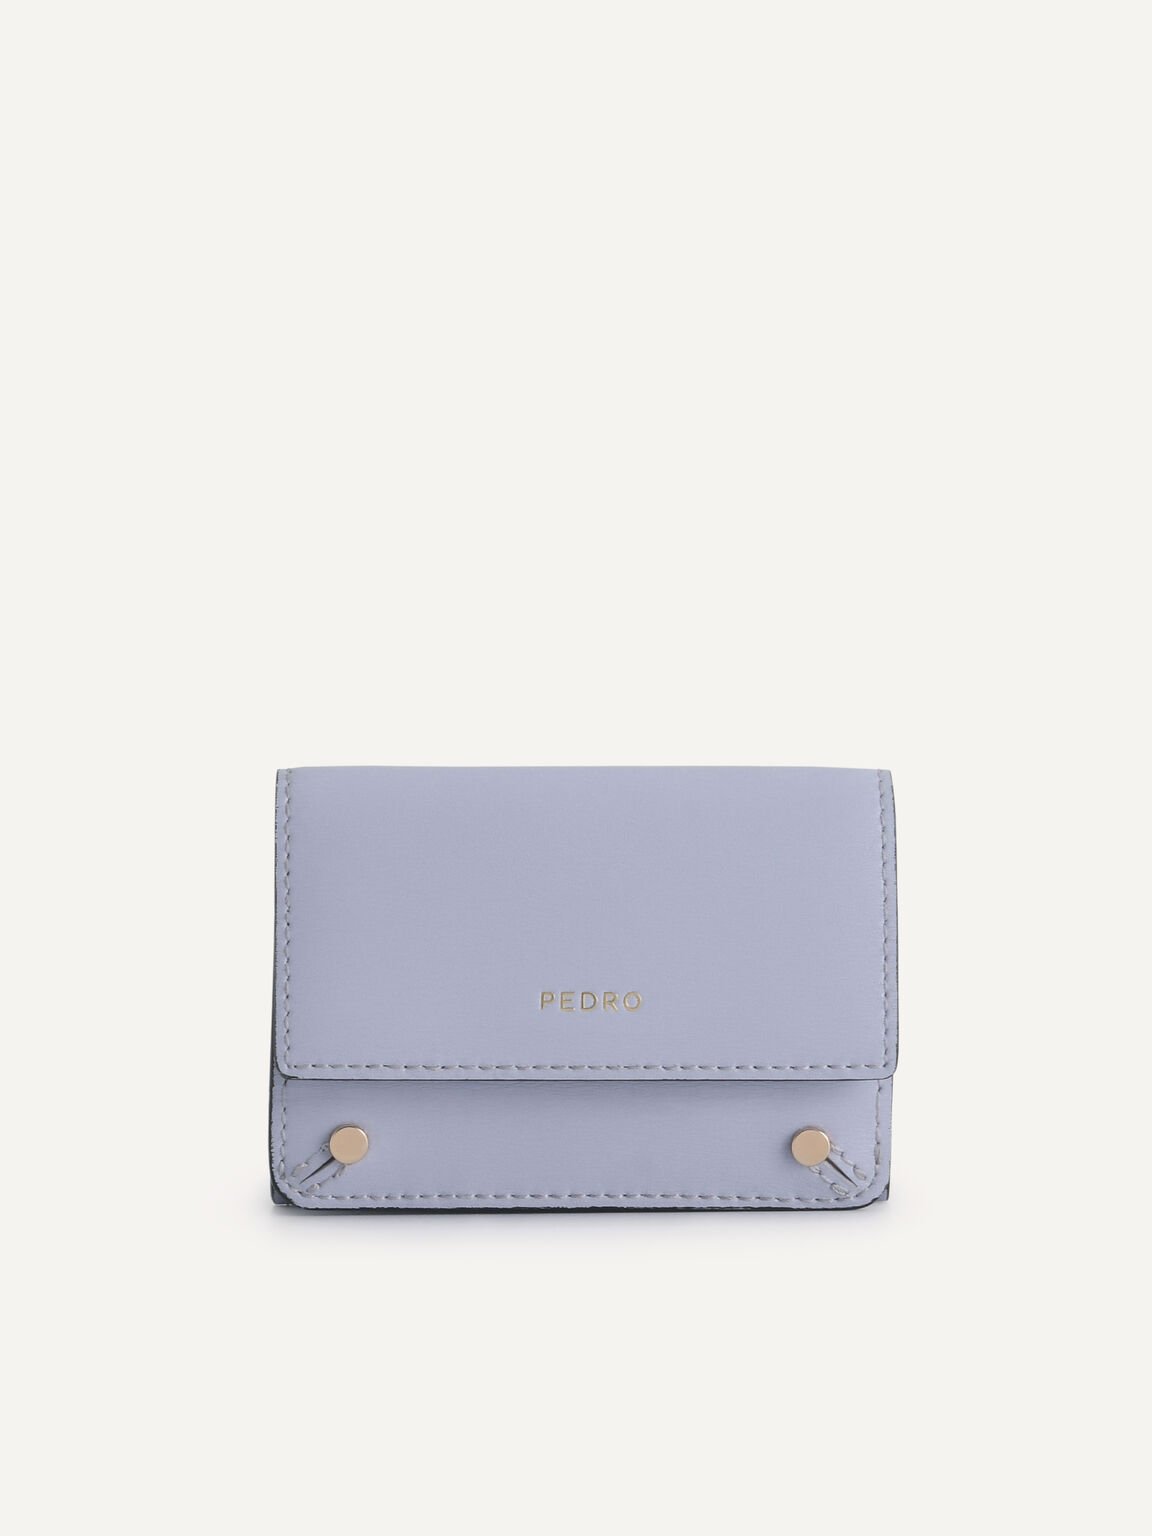 Textured Leather Trifold Wallet, Lilac, hi-res